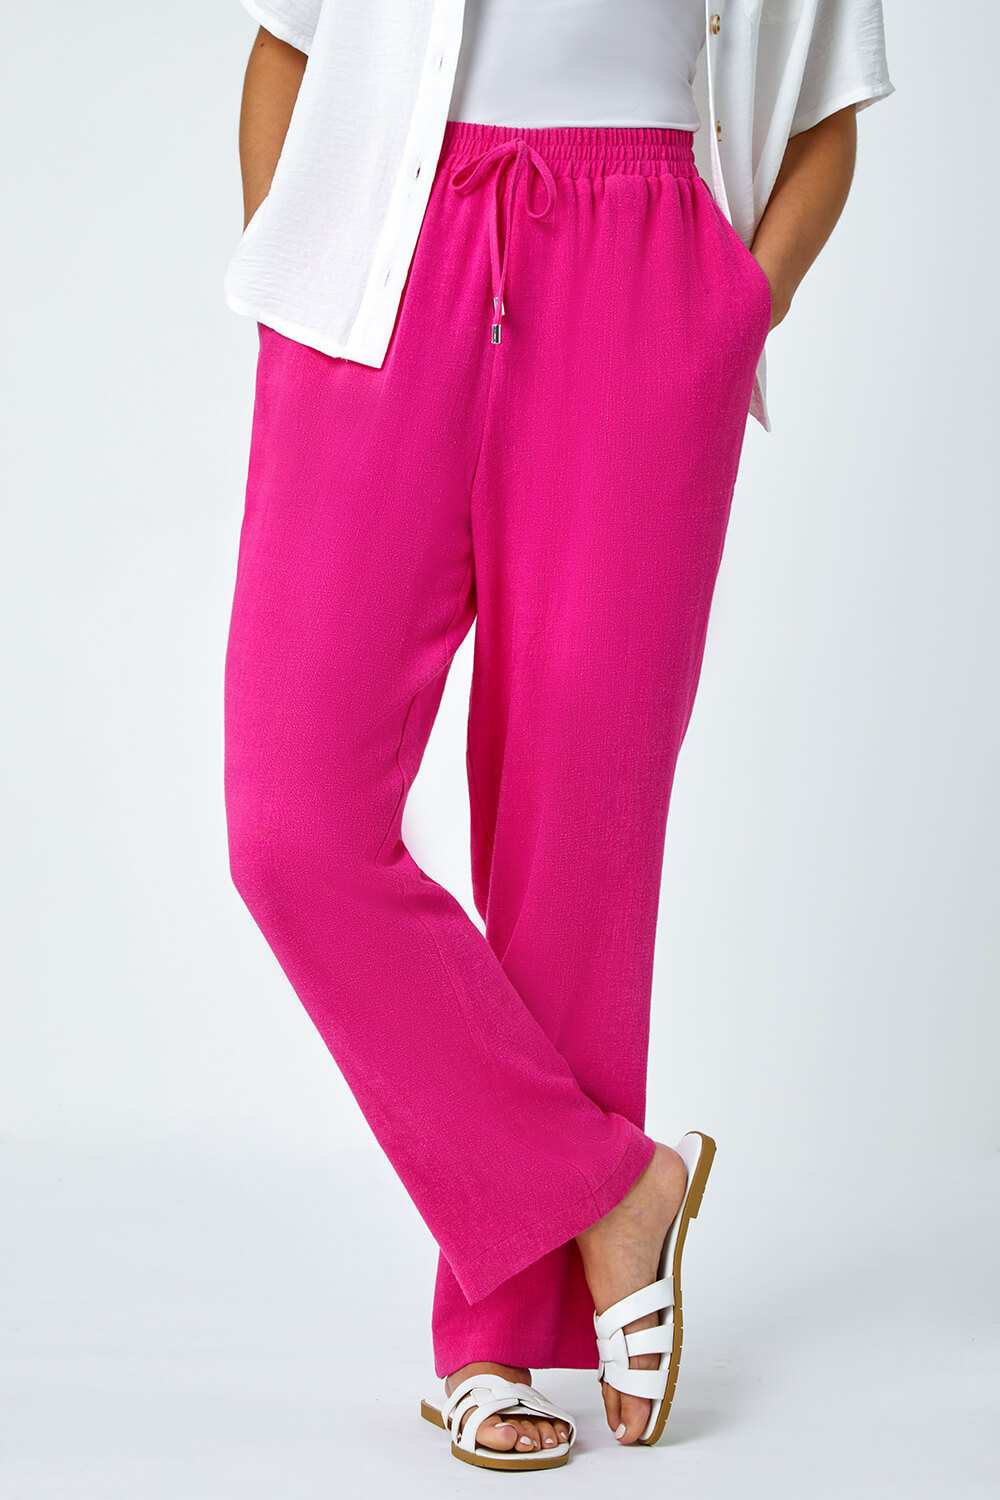 PINK Petite Linen Mix Trousers, Image 4 of 5